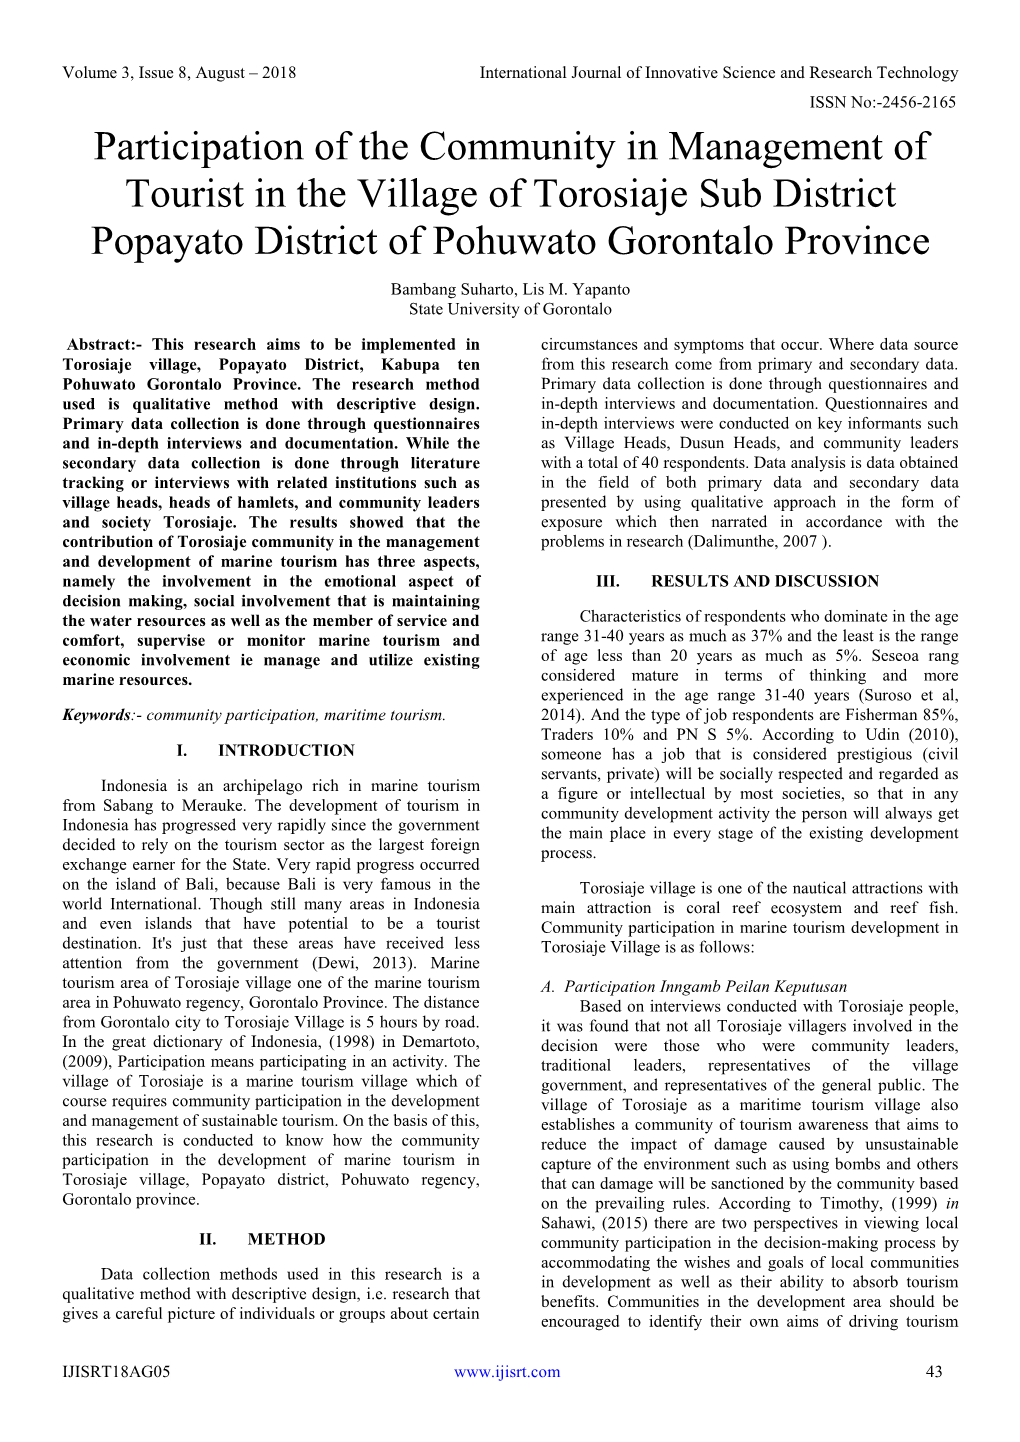 Participation of the Community in Management of Tourist in the Village of Torosiaje Sub District Popayato District of Pohuwato Gorontalo Province